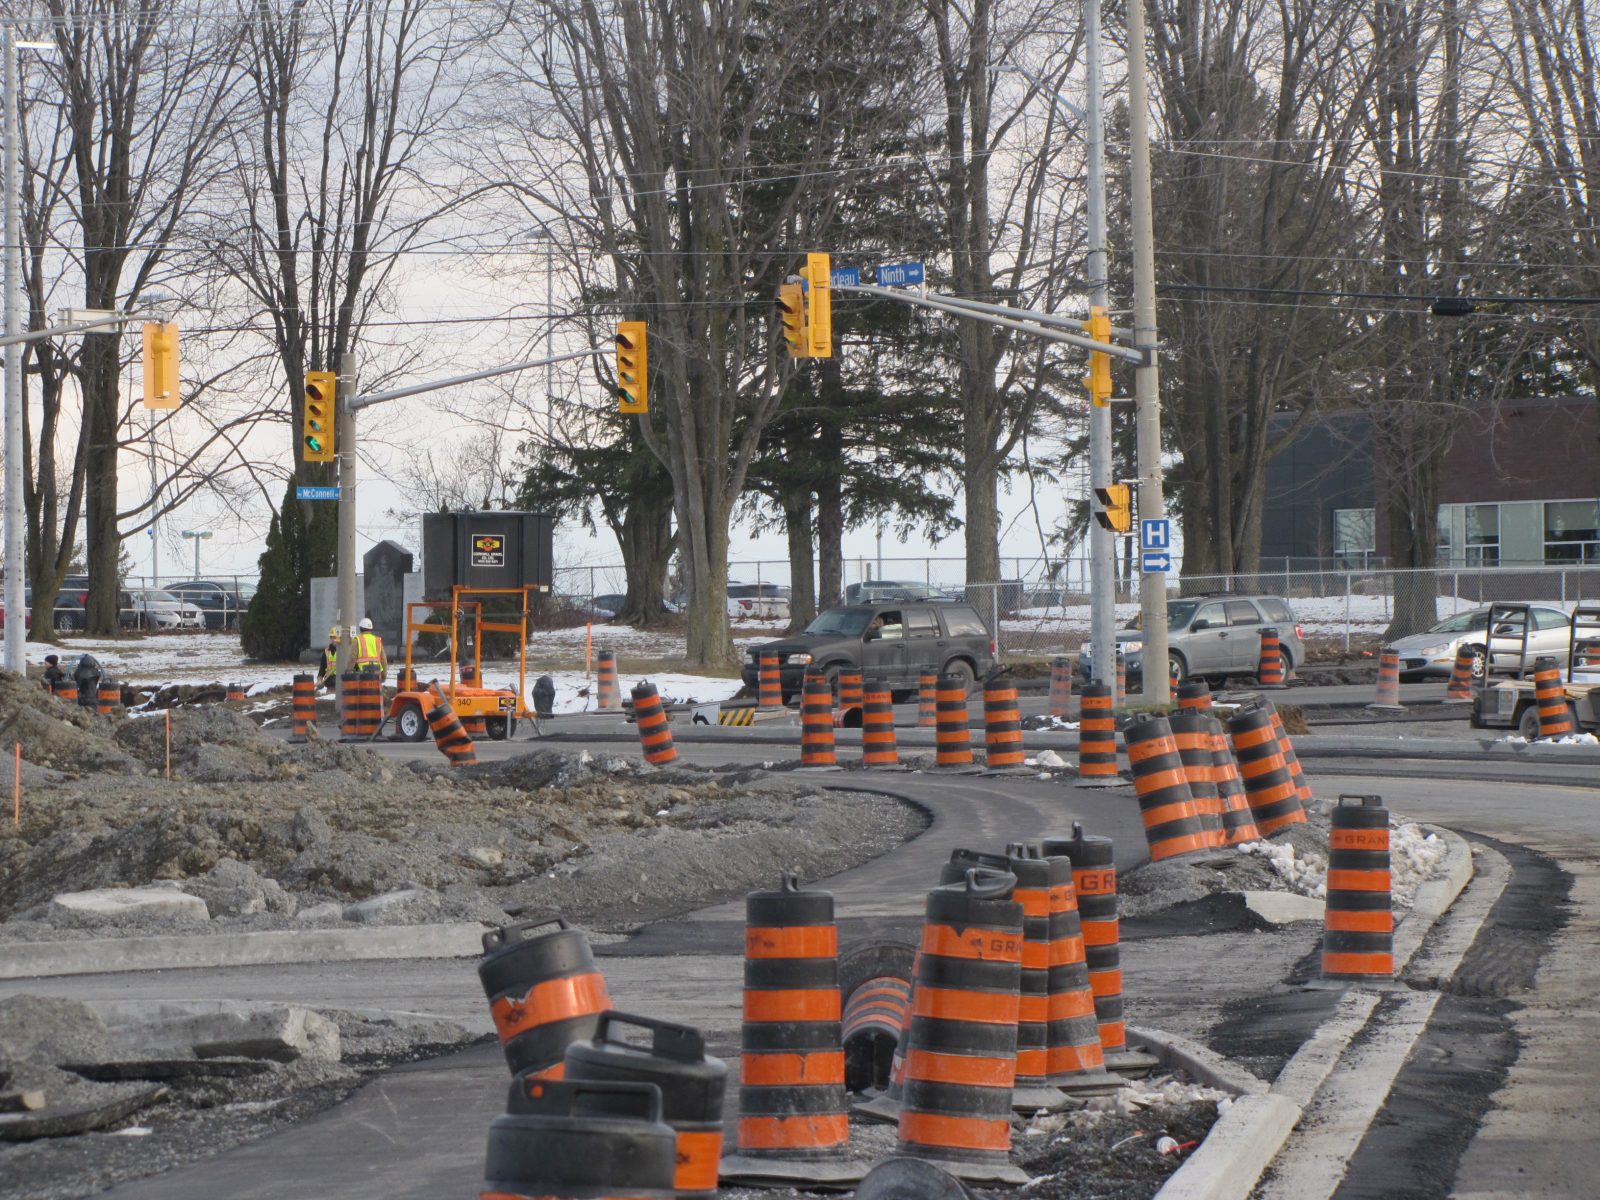 City issues reminder about construction zone rules